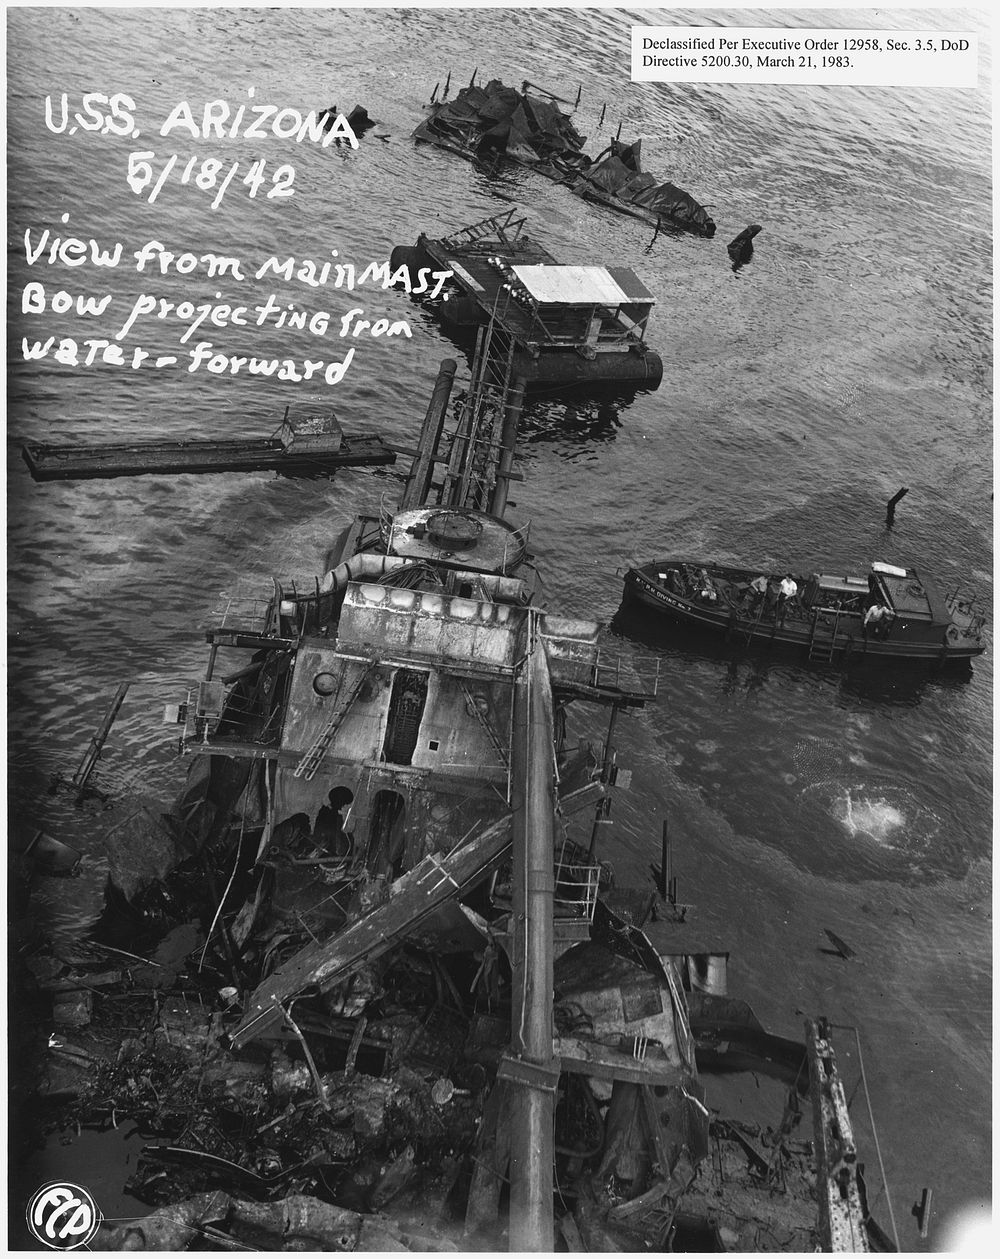 USS Arizona; View from main mast. Bow projecting from water- forward (FCP), 05/18/1942. Original public domain image from…